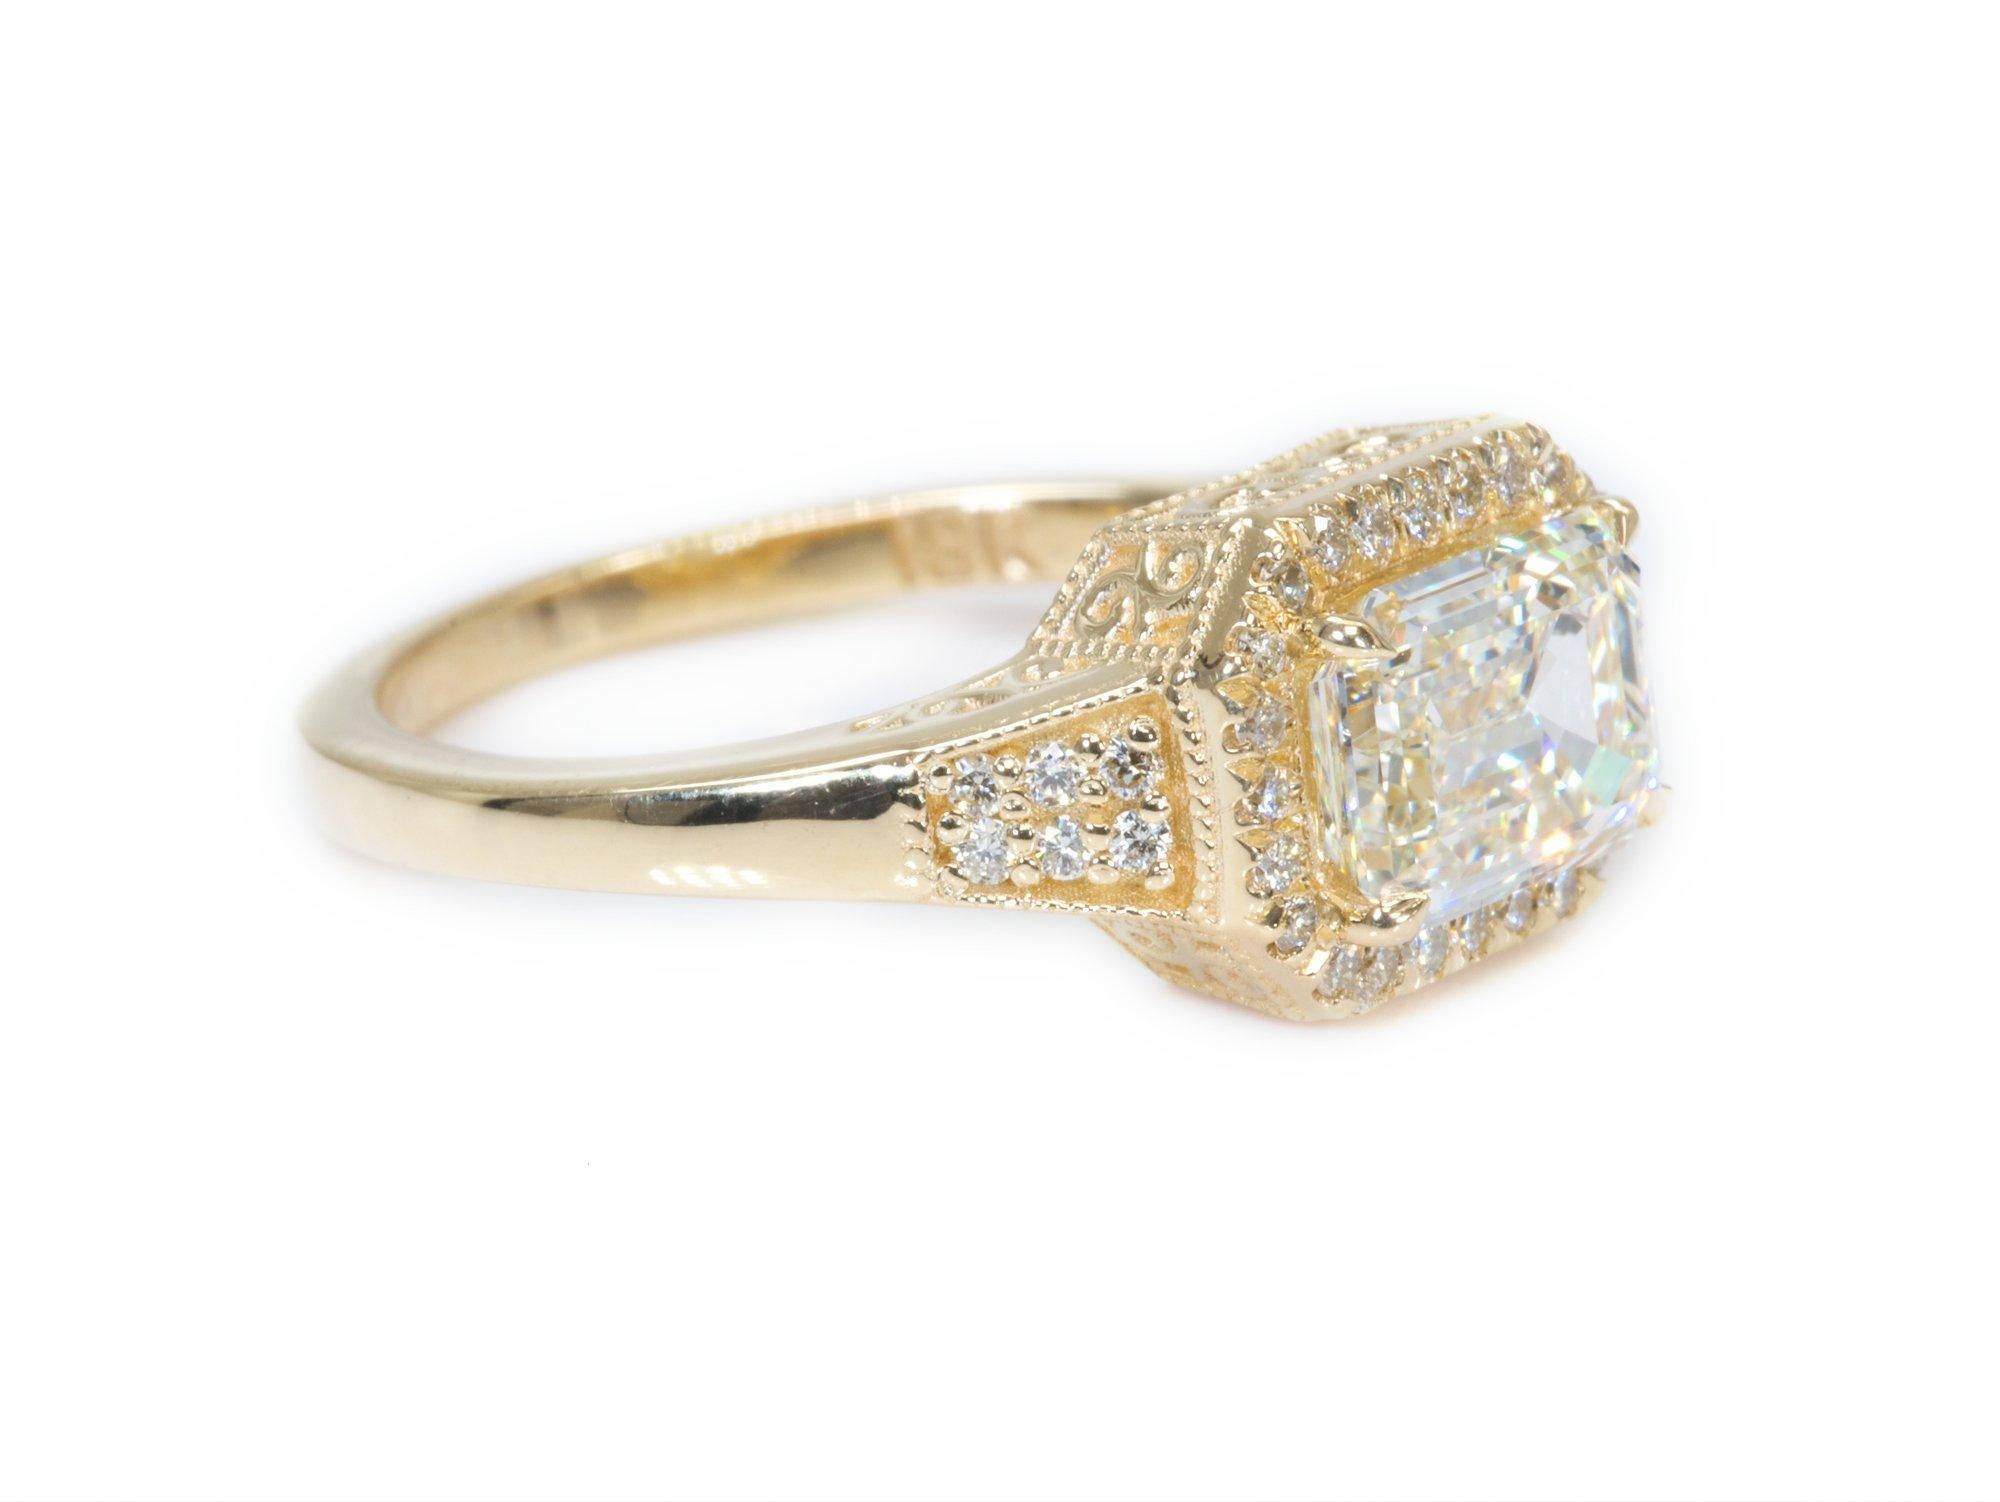 Ideal and brilliant natural emerald cut diamond with a 1.50 carat weight  mounted in Antique halo style ring with 0.17 carat of ideal and natural round brilliant diamonds made from 18k yellow gold ring with AIG certificate.

one of a kind ring 

Set